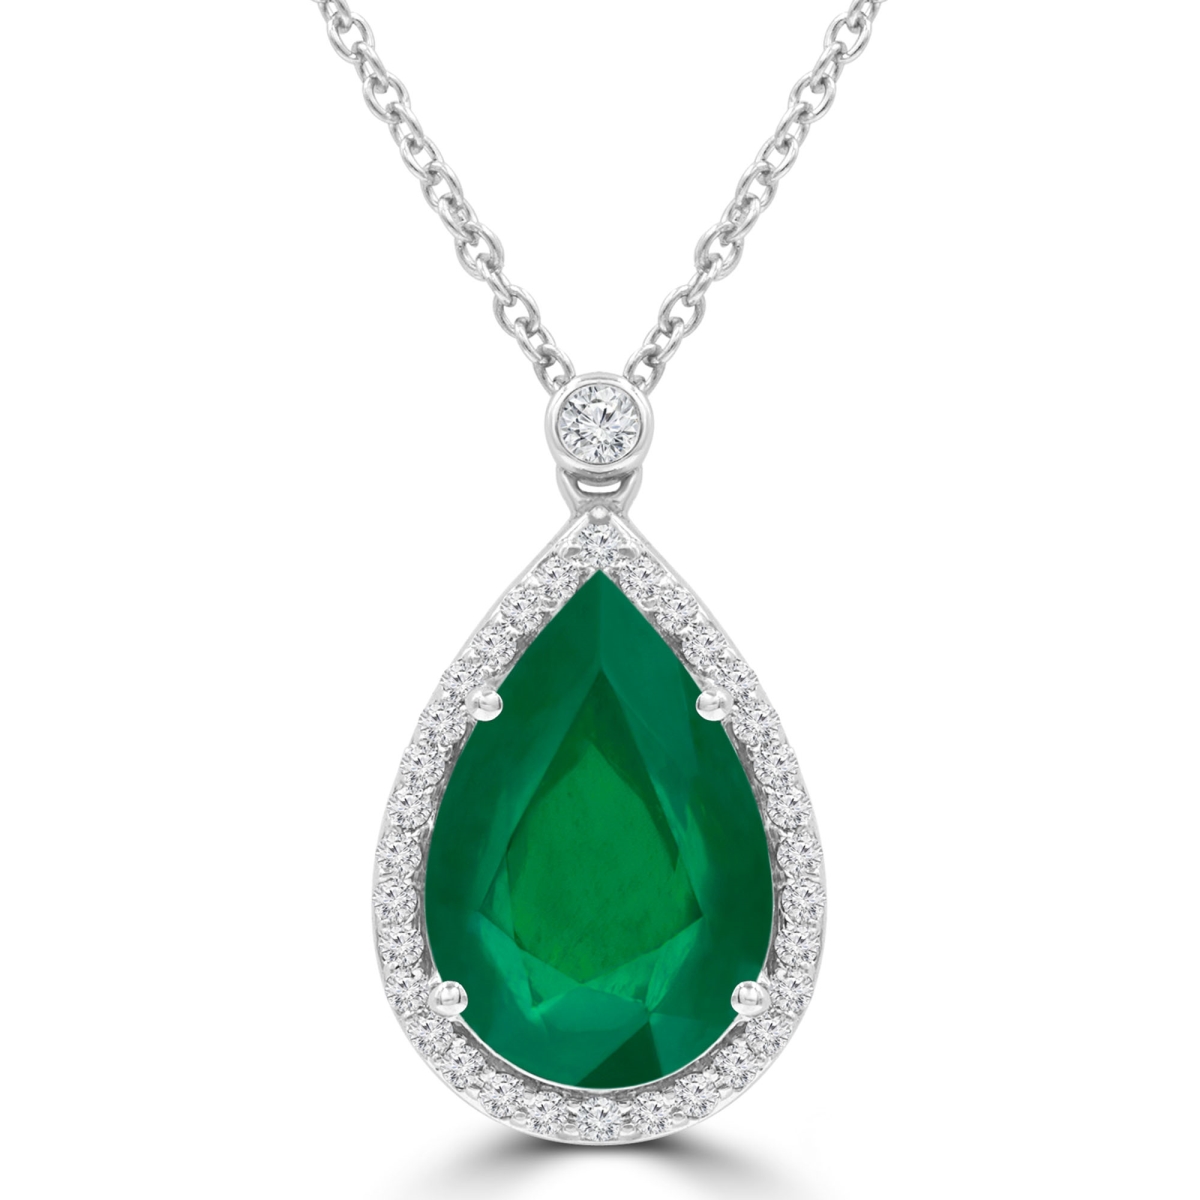 Picture of Majesty Diamonds MDR220175 3.5 CTW Pear Green Emerald Pear Halo Pendant Necklace in 14K White Gold